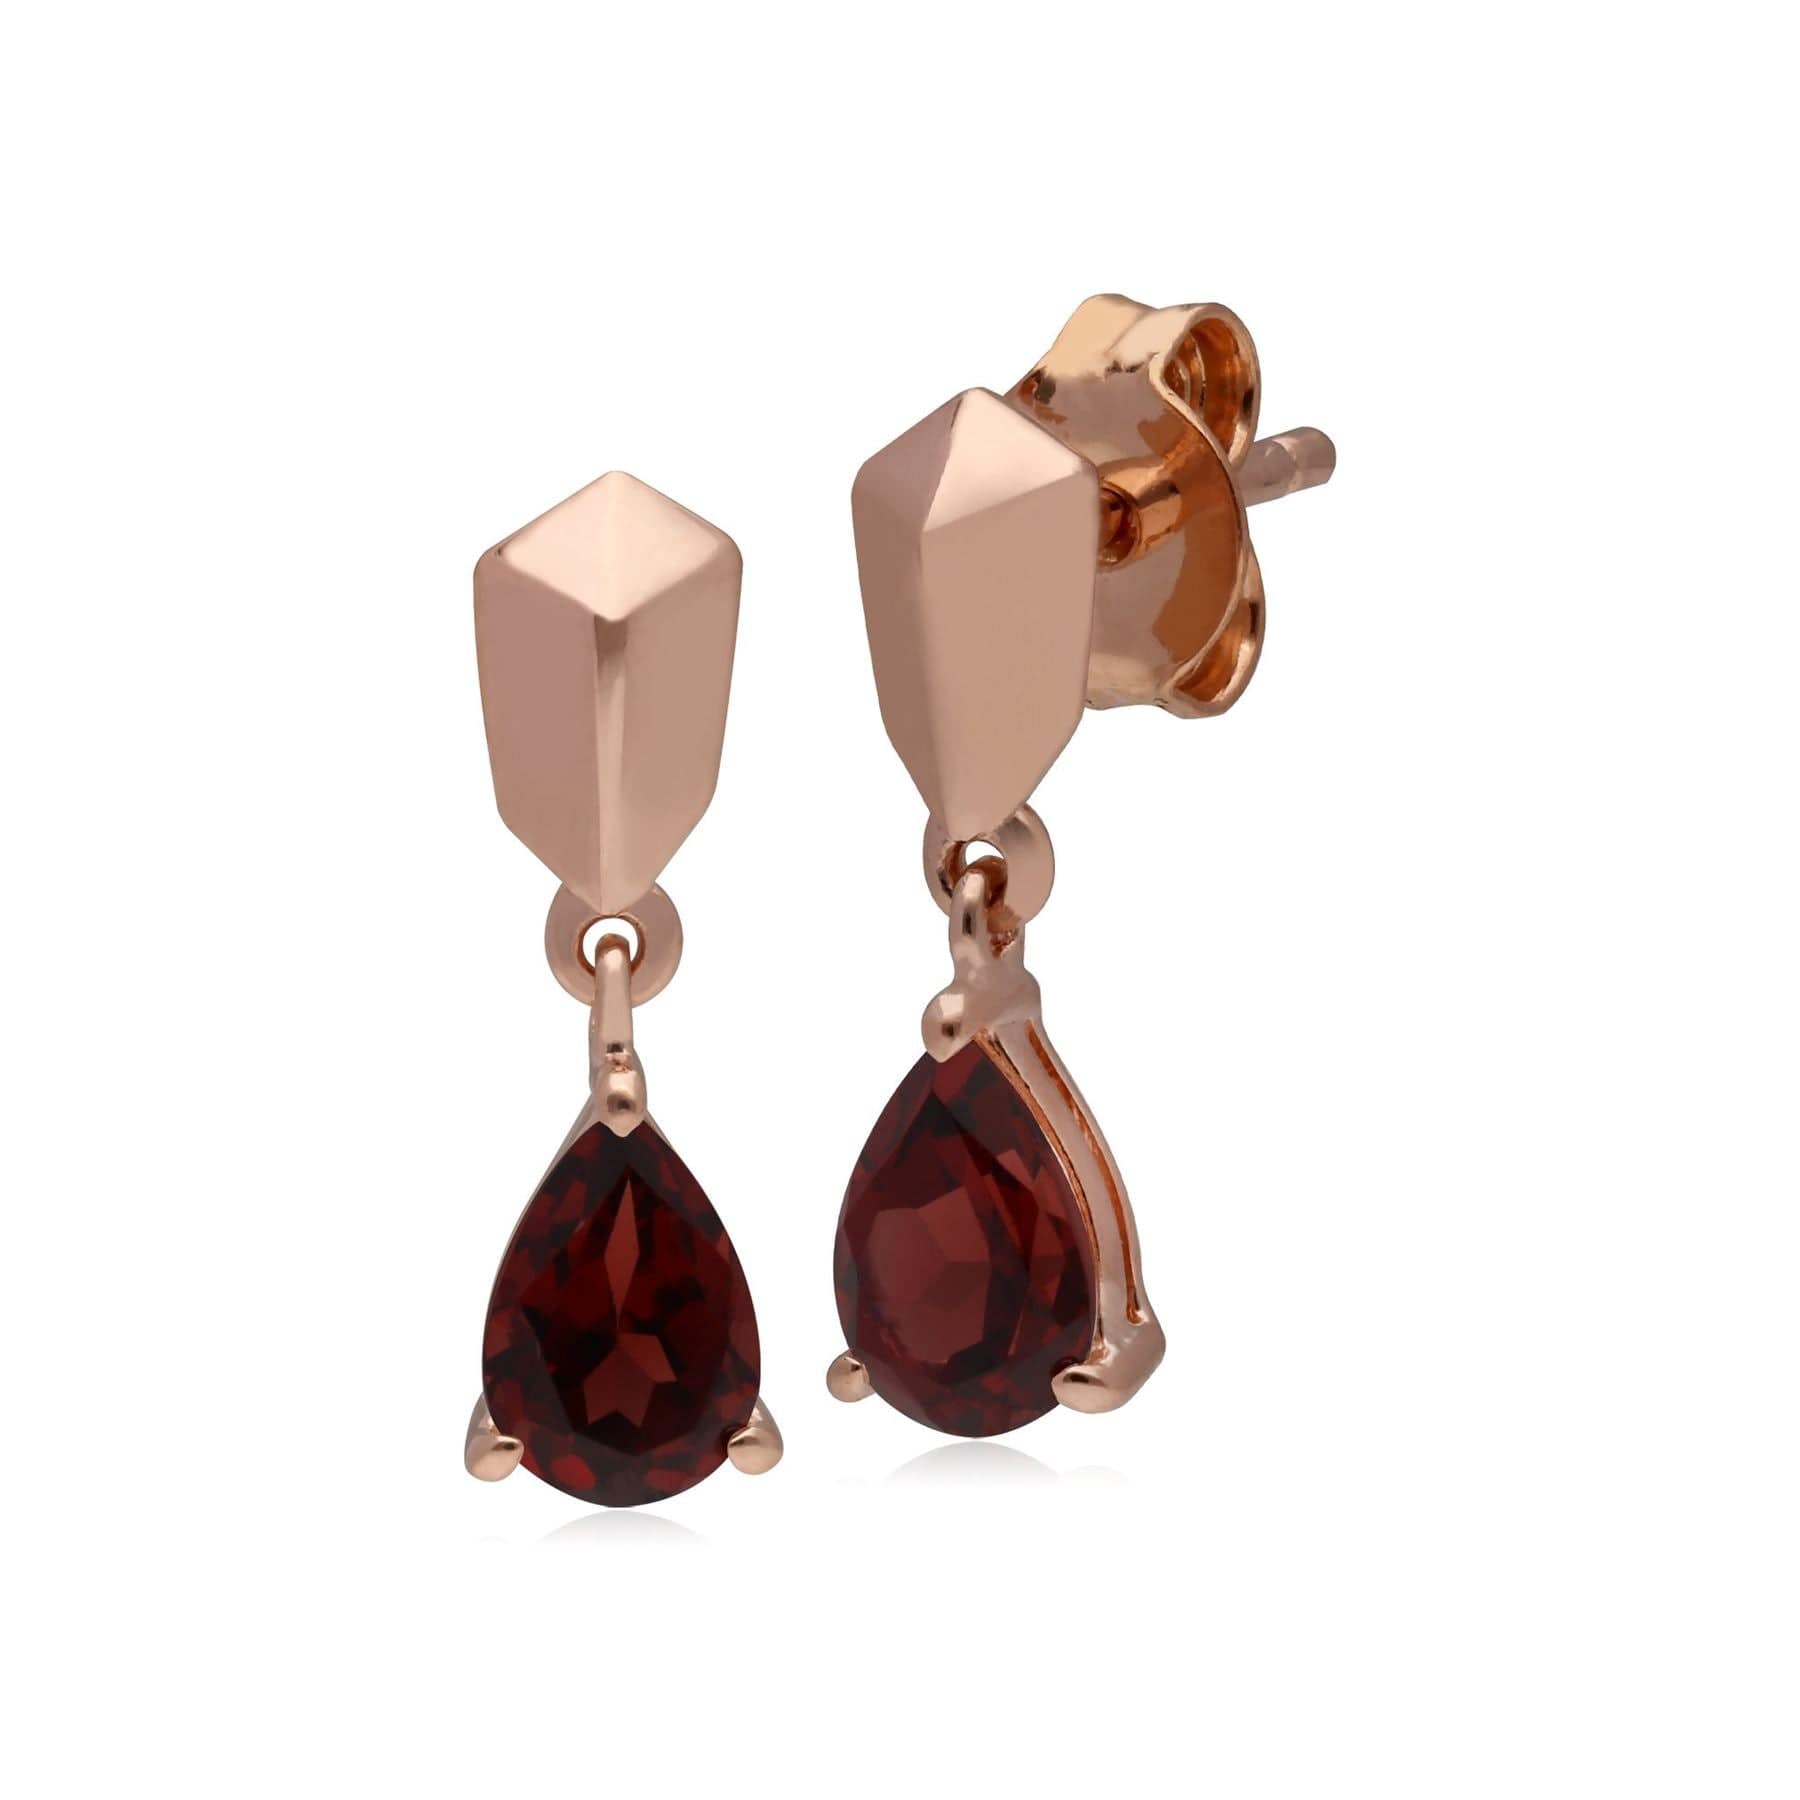 Micro Statement Garnet Earrings in Rose Gold Plated 925 Sterling